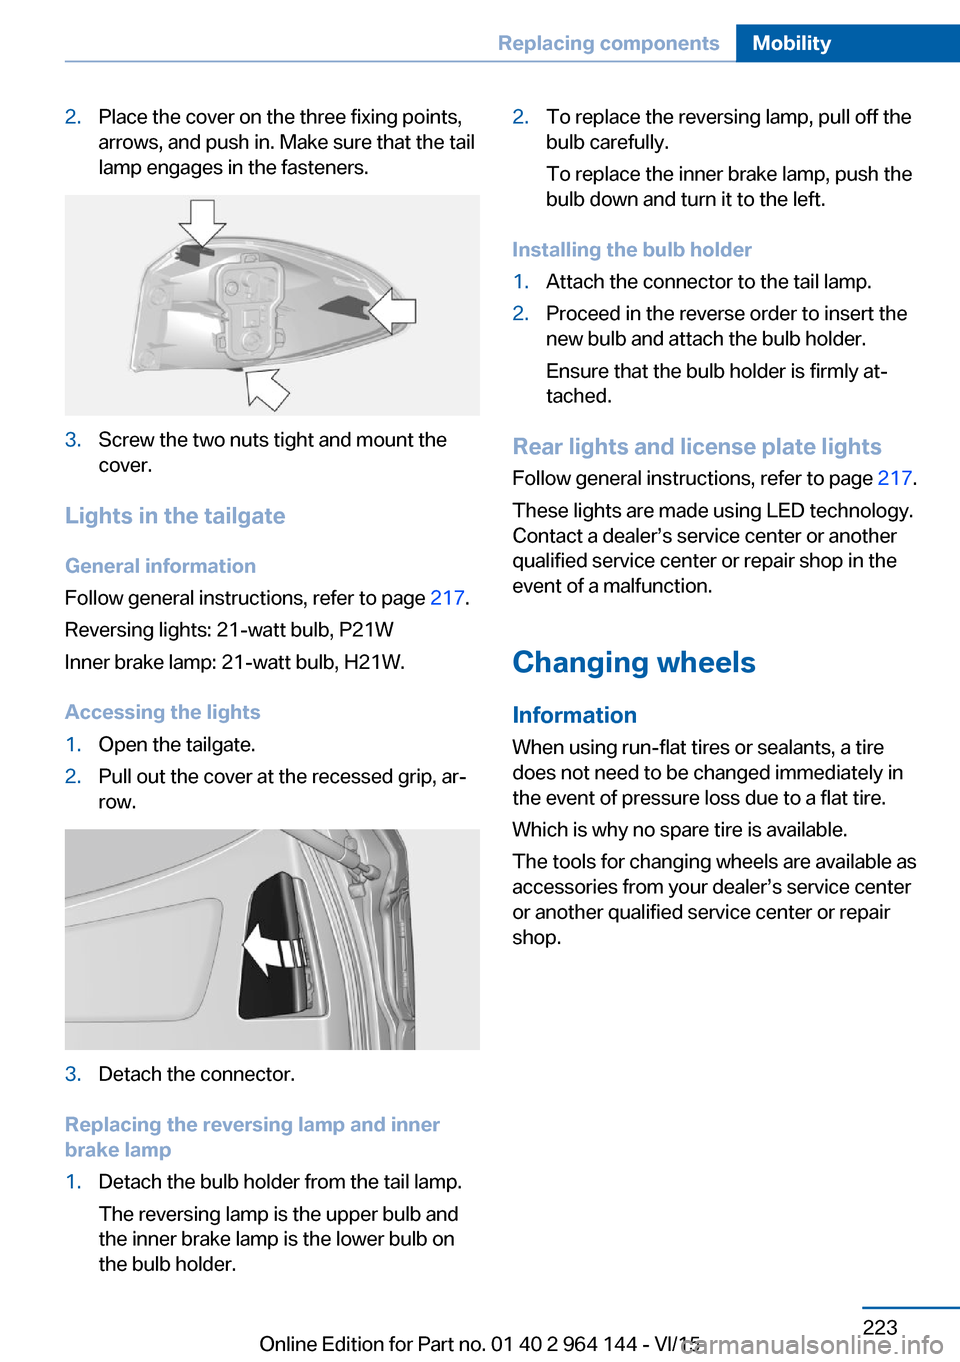 BMW X4 2015 F26 Owners Manual 2.Place the cover on the three fixing points,
arrows, and push in. Make sure that the tail
lamp engages in the fasteners.3.Screw the two nuts tight and mount the
cover.
Lights in the tailgate
General 